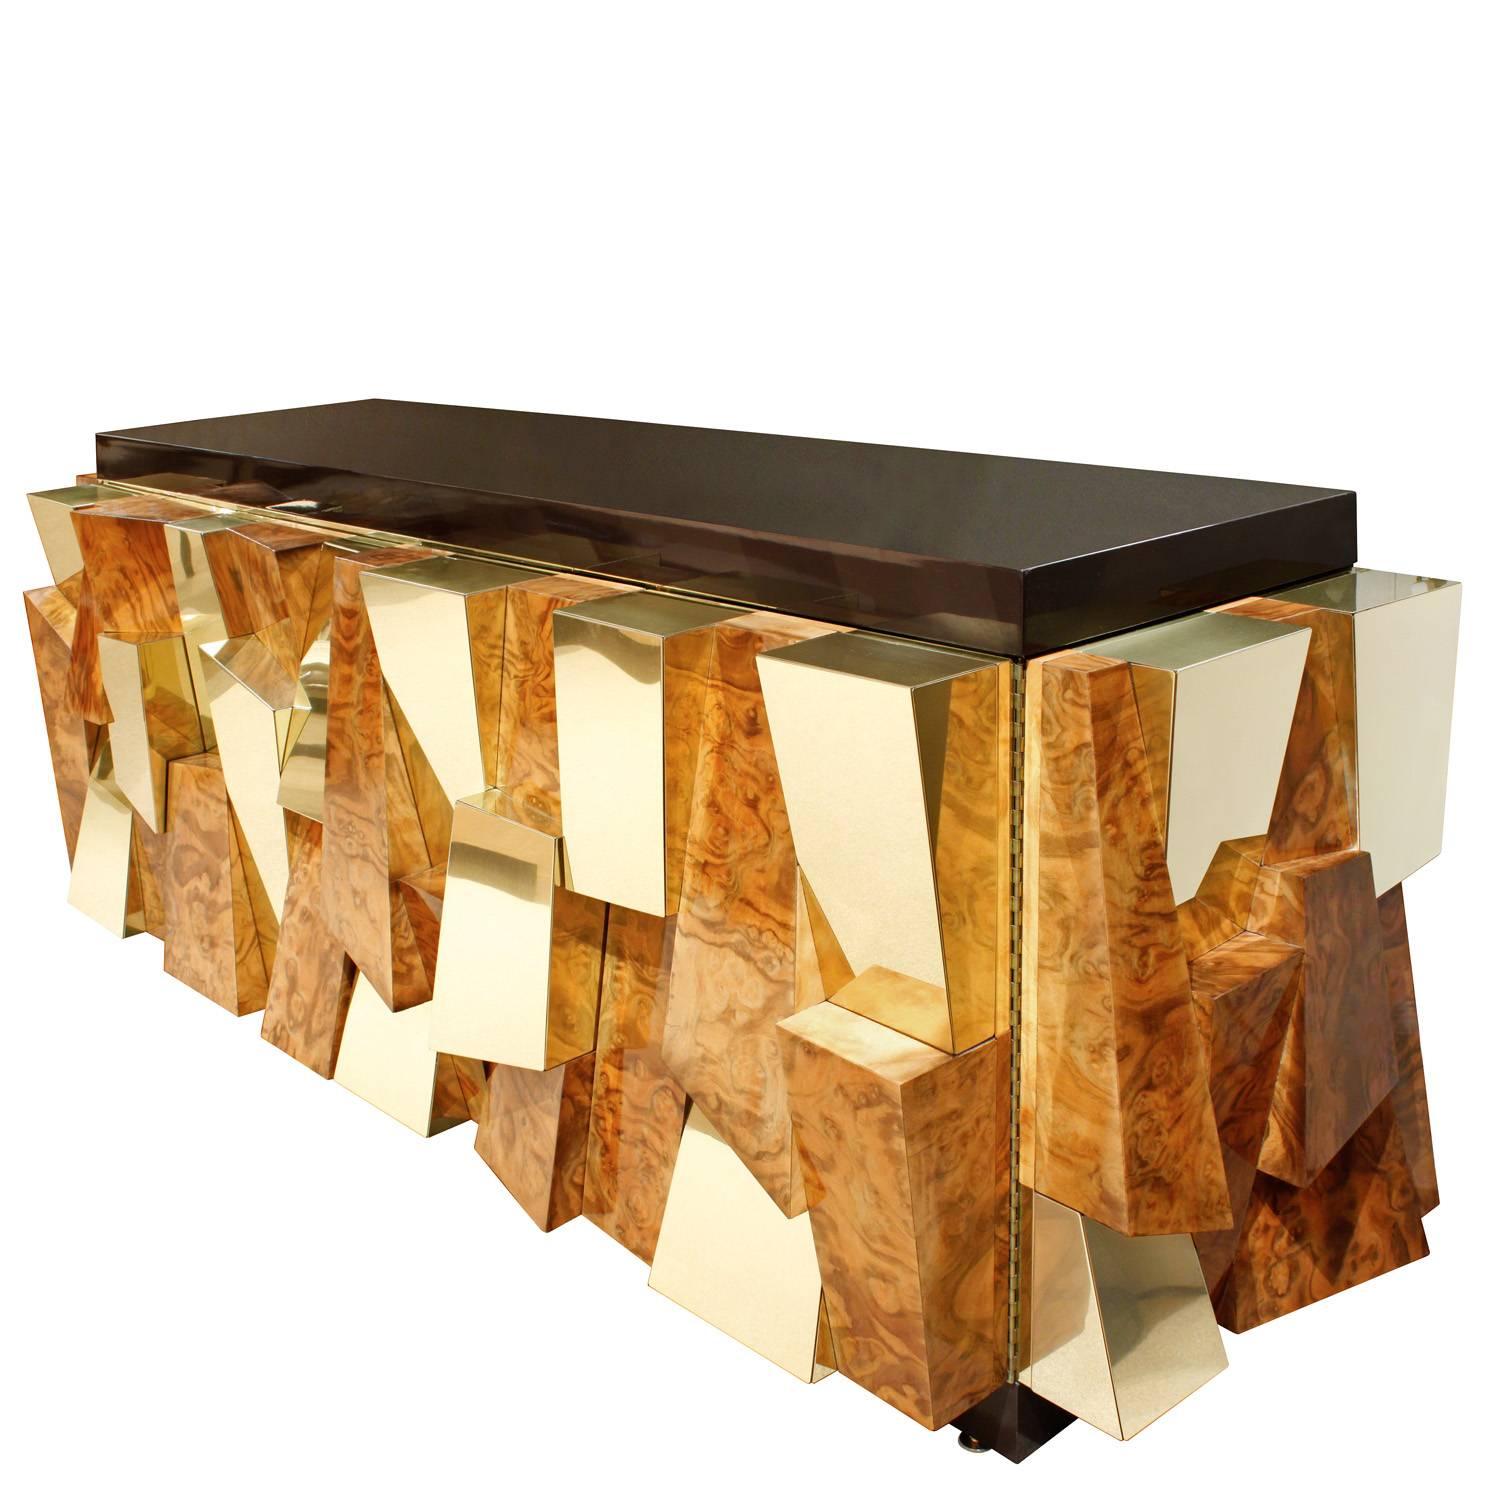 Exceptional credenza model PE-366, faceted in walnut burl and brass with brown fiberglass top, by Paul Evans for Directional Furniture, American 1965. This is an exceptional and iconic example of Paul Evans’ work.  The model number PE-366 and date